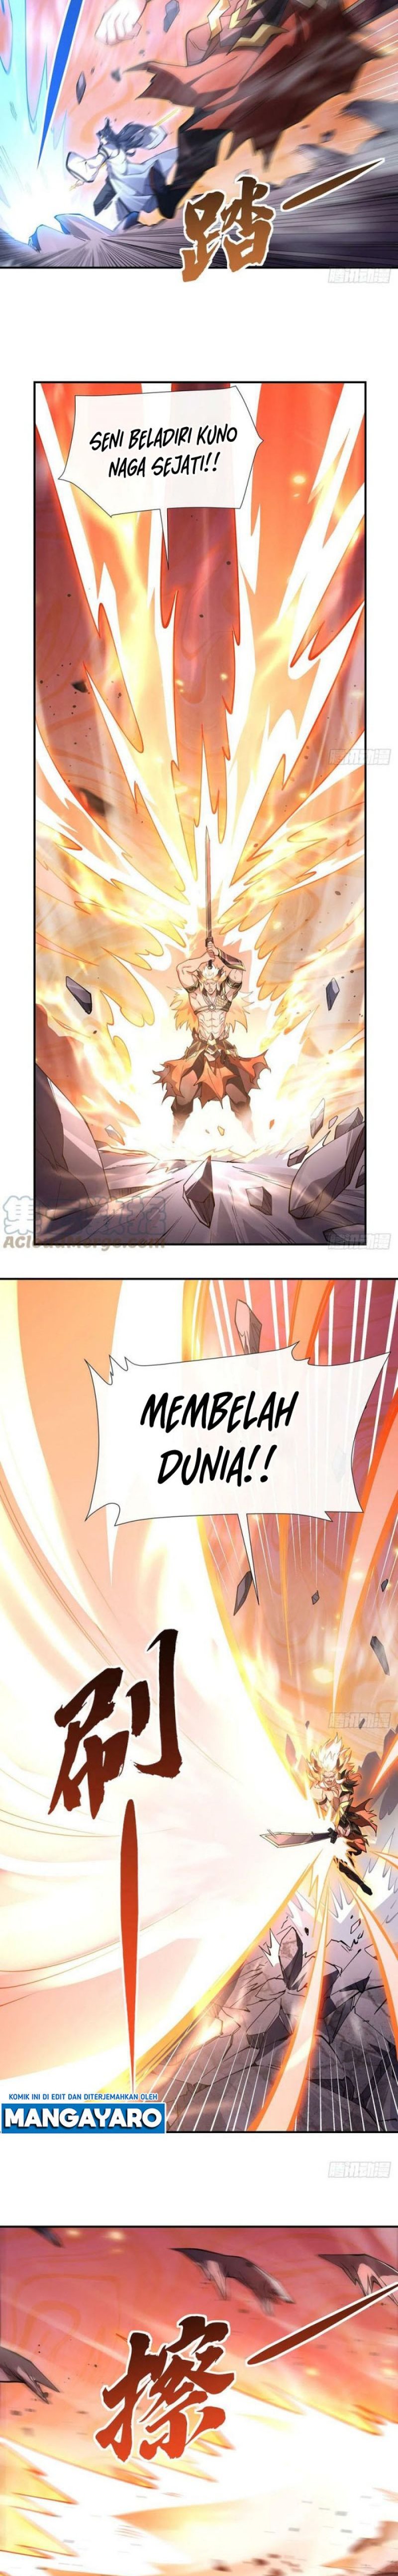 Dilarang COPAS - situs resmi www.mangacanblog.com - Komik my female apprentices are all big shots from the future 141 - chapter 141 142 Indonesia my female apprentices are all big shots from the future 141 - chapter 141 Terbaru 7|Baca Manga Komik Indonesia|Mangacan